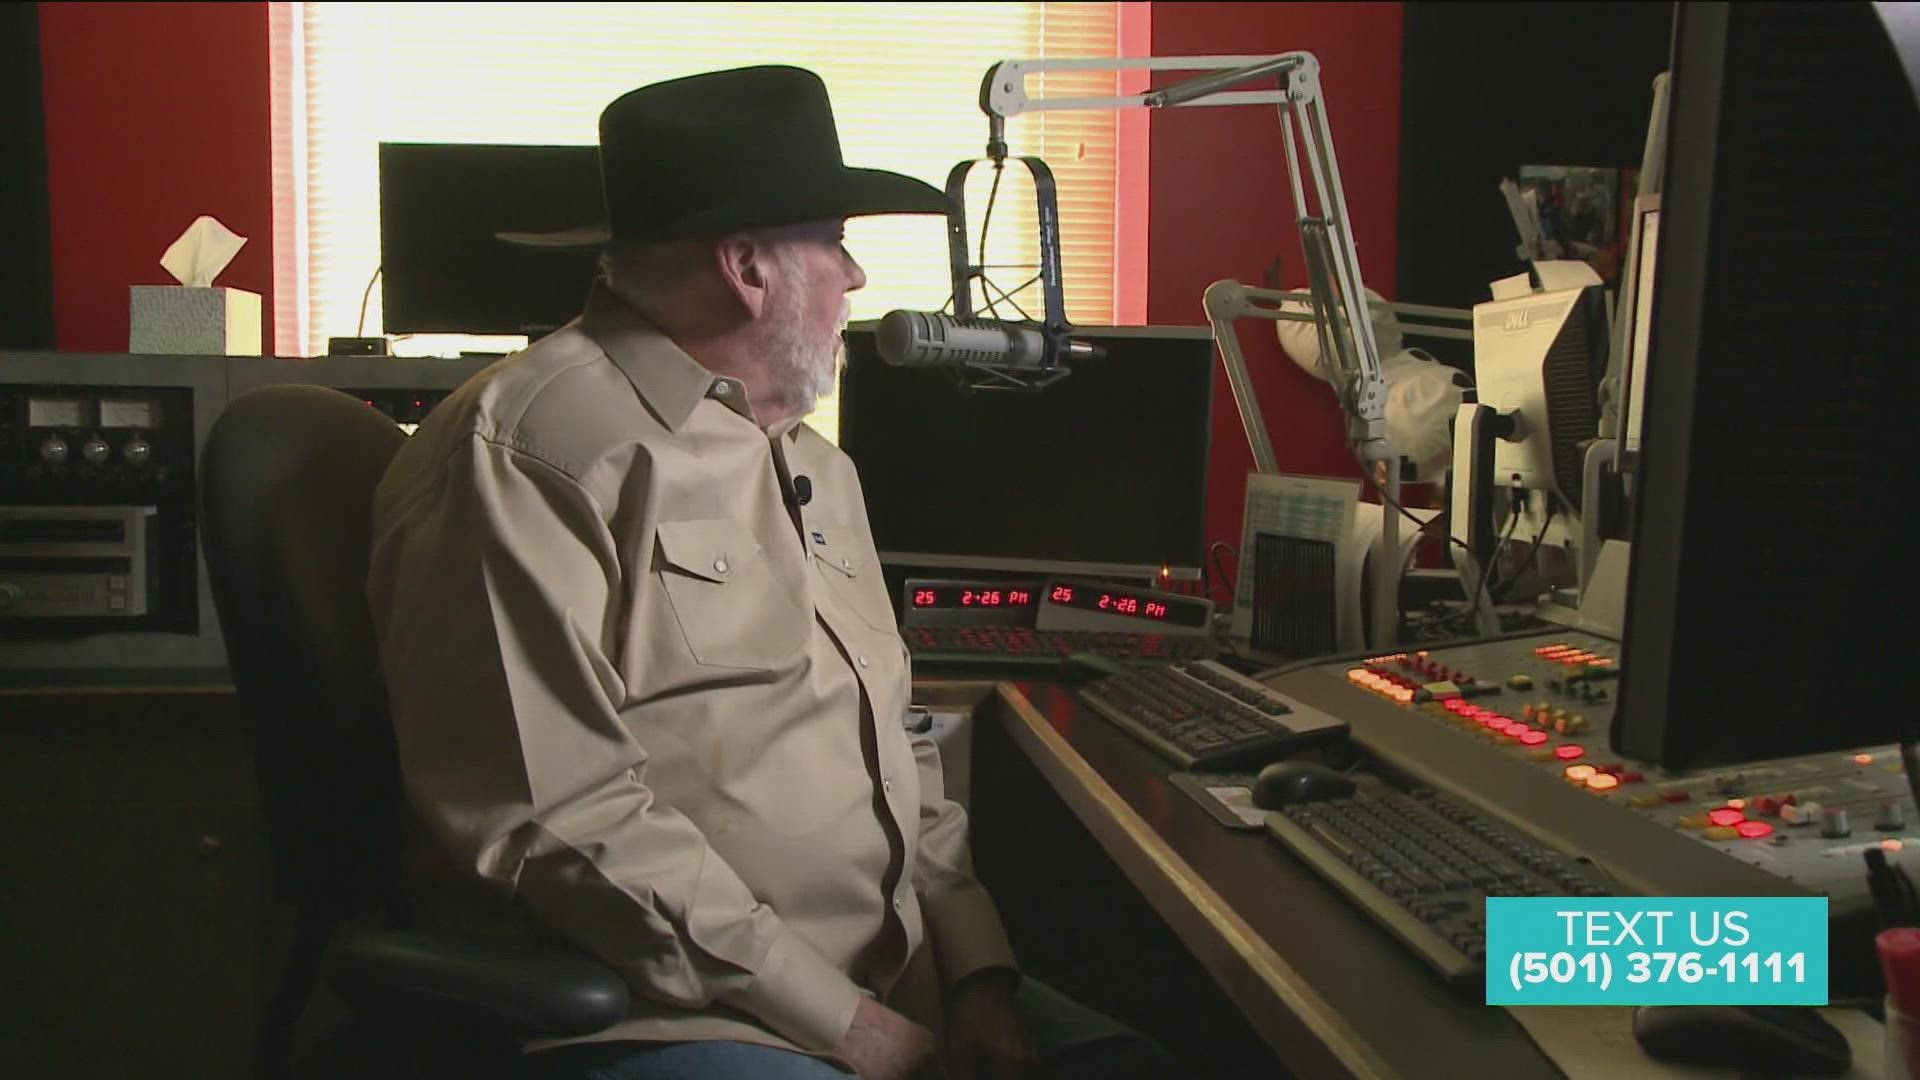 The Arkansas Country Music Awards are fast approaching and Charles Haymes longtime country music journalist and historian is one of the hosts of the show.